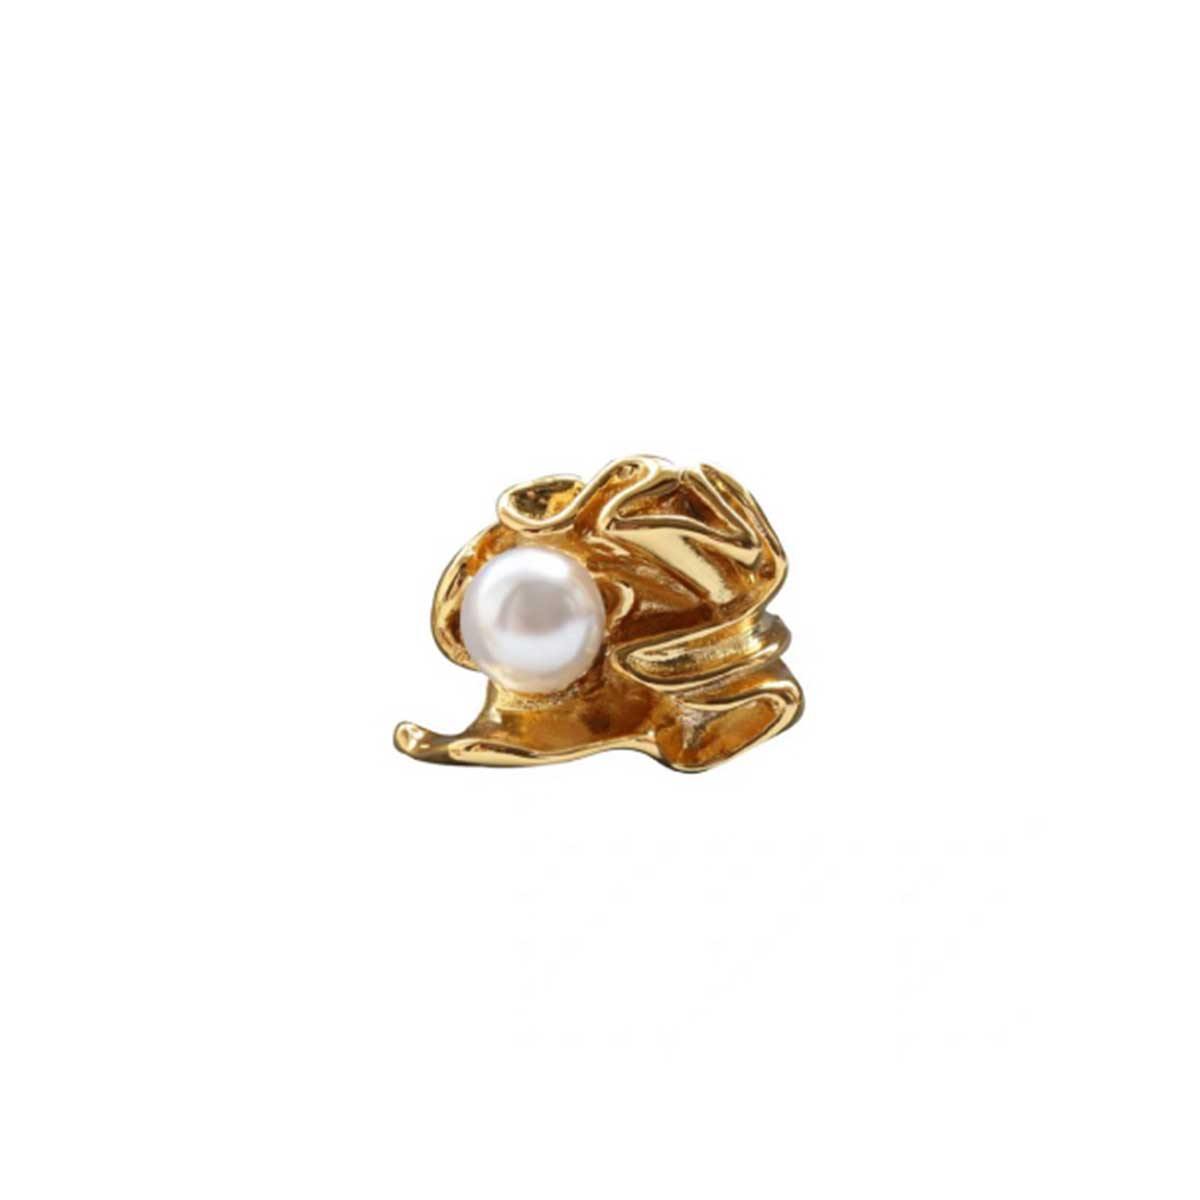 Smooth unblemished pearl enclosed within an 18k gold plated chunky ring handmade from brass for party wear